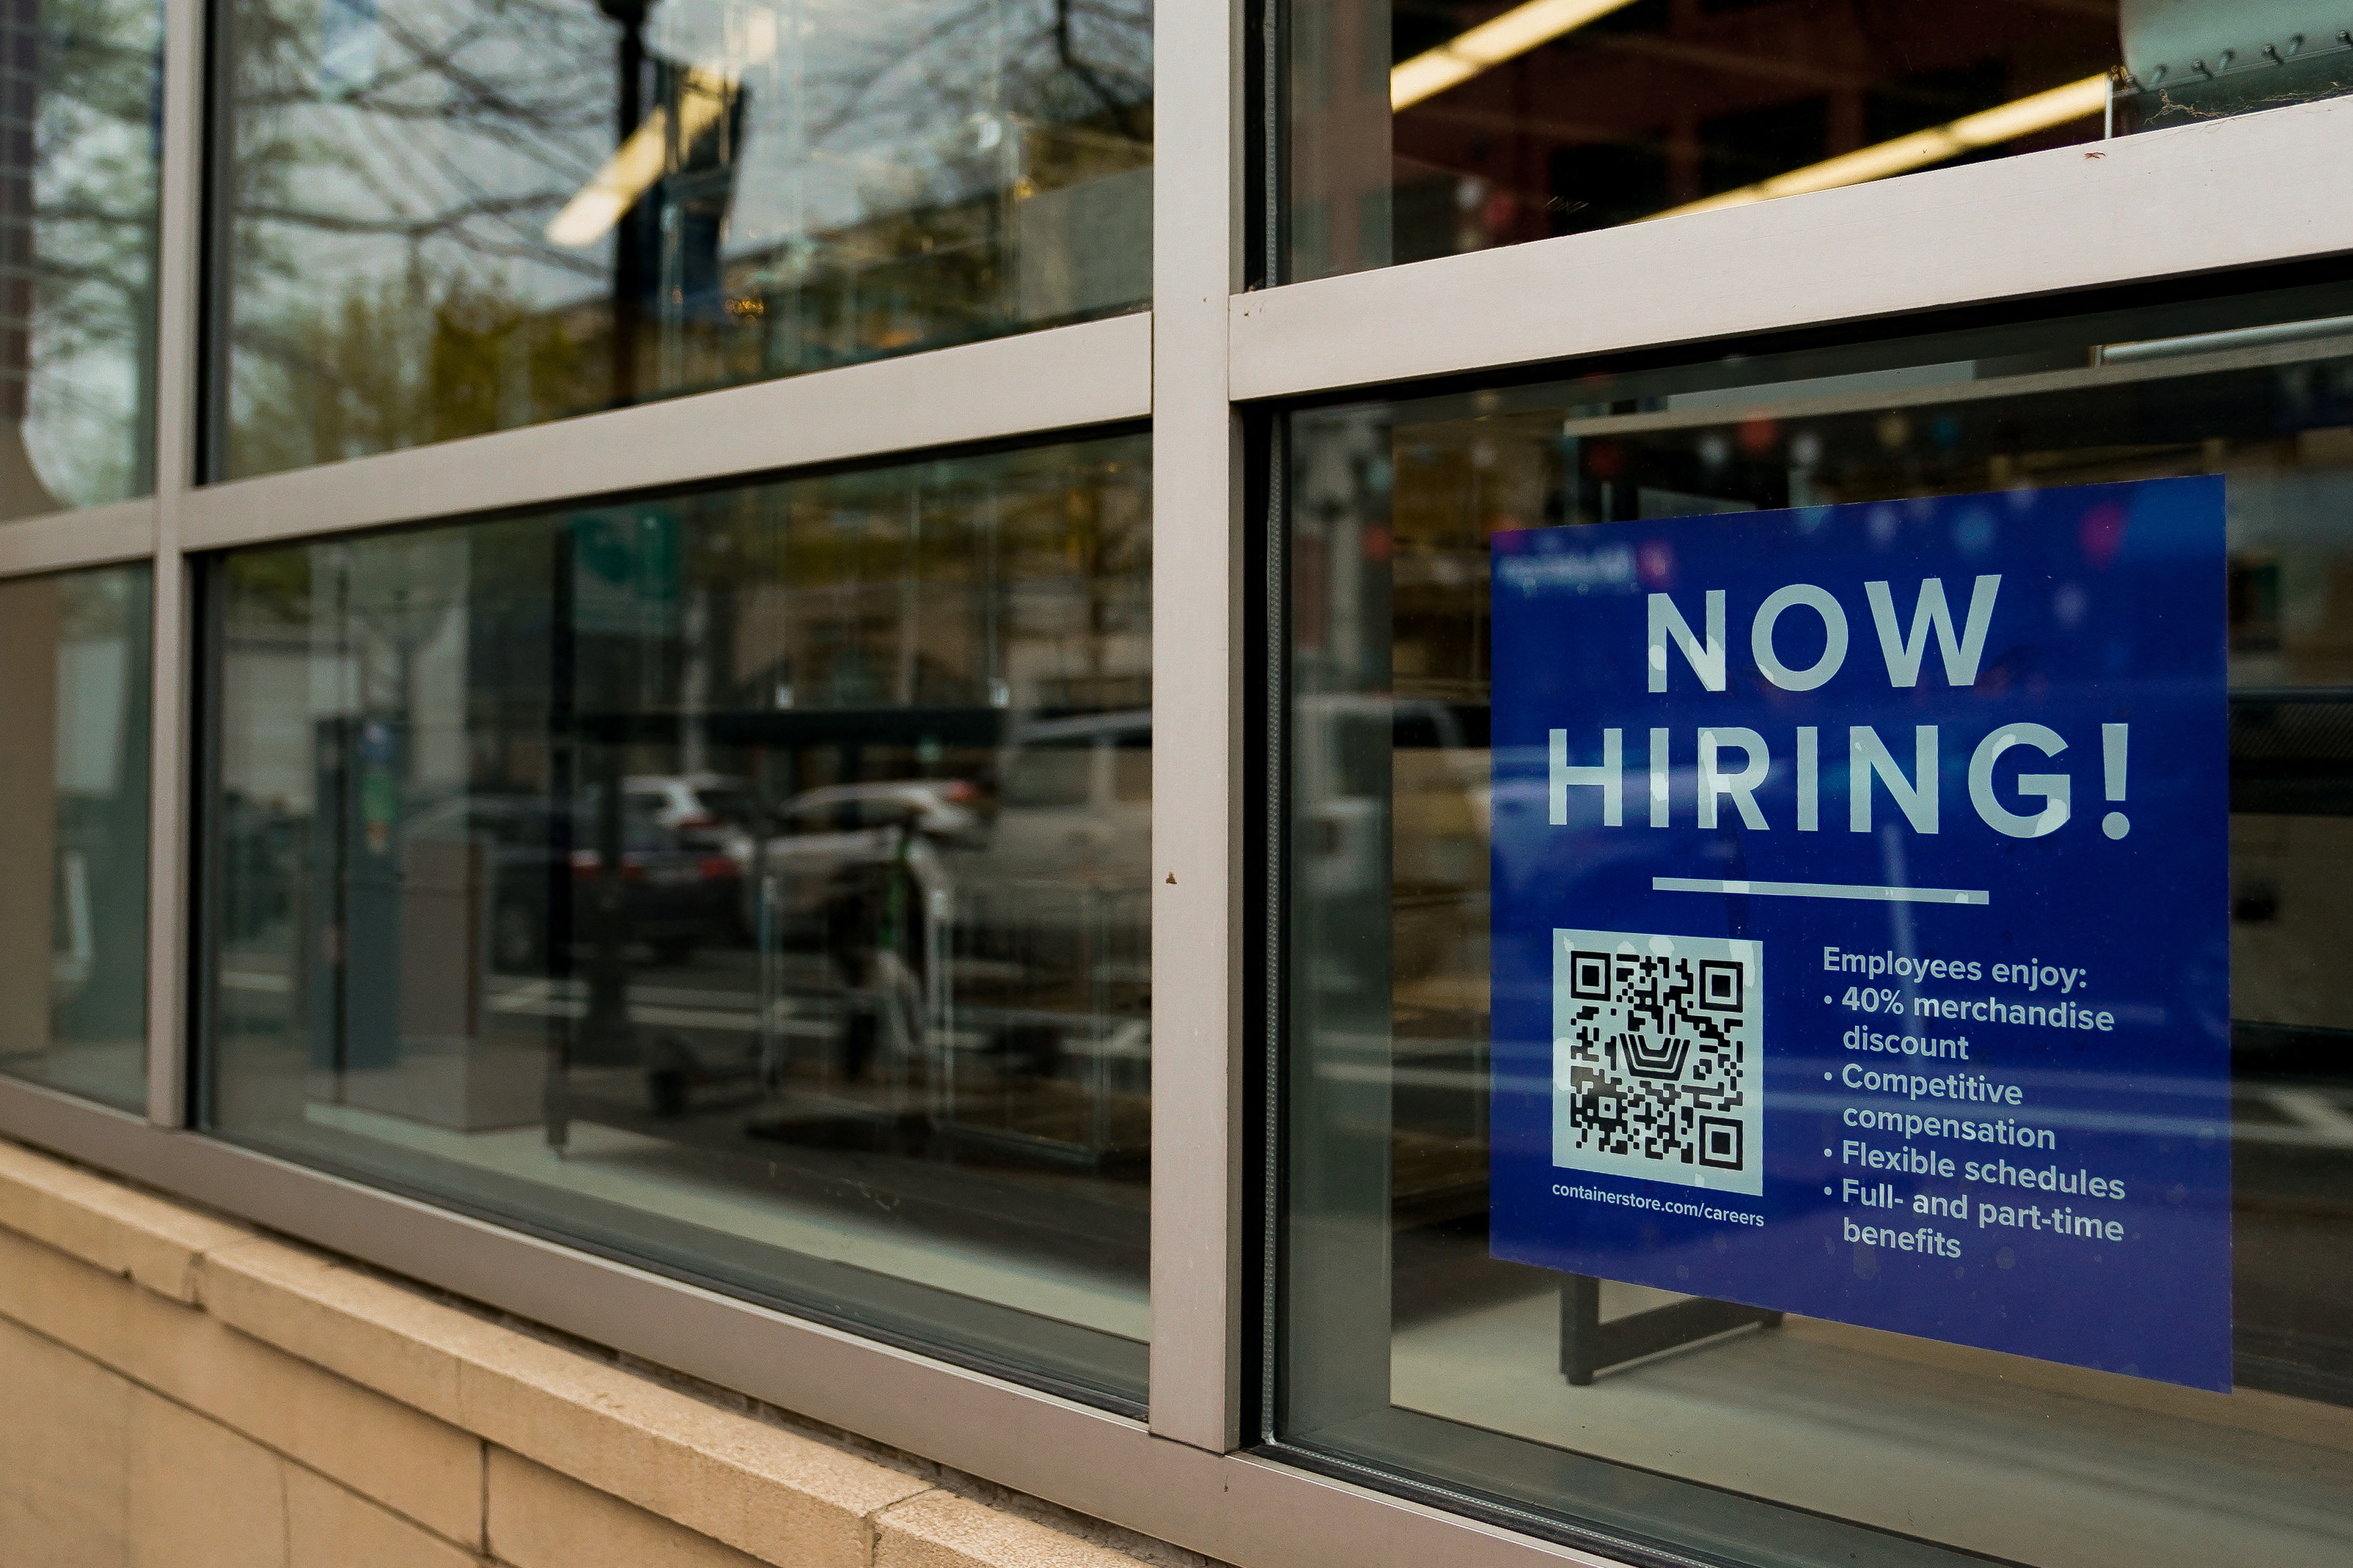 An employment sign with a QR code is seen in a window at an Arlington business